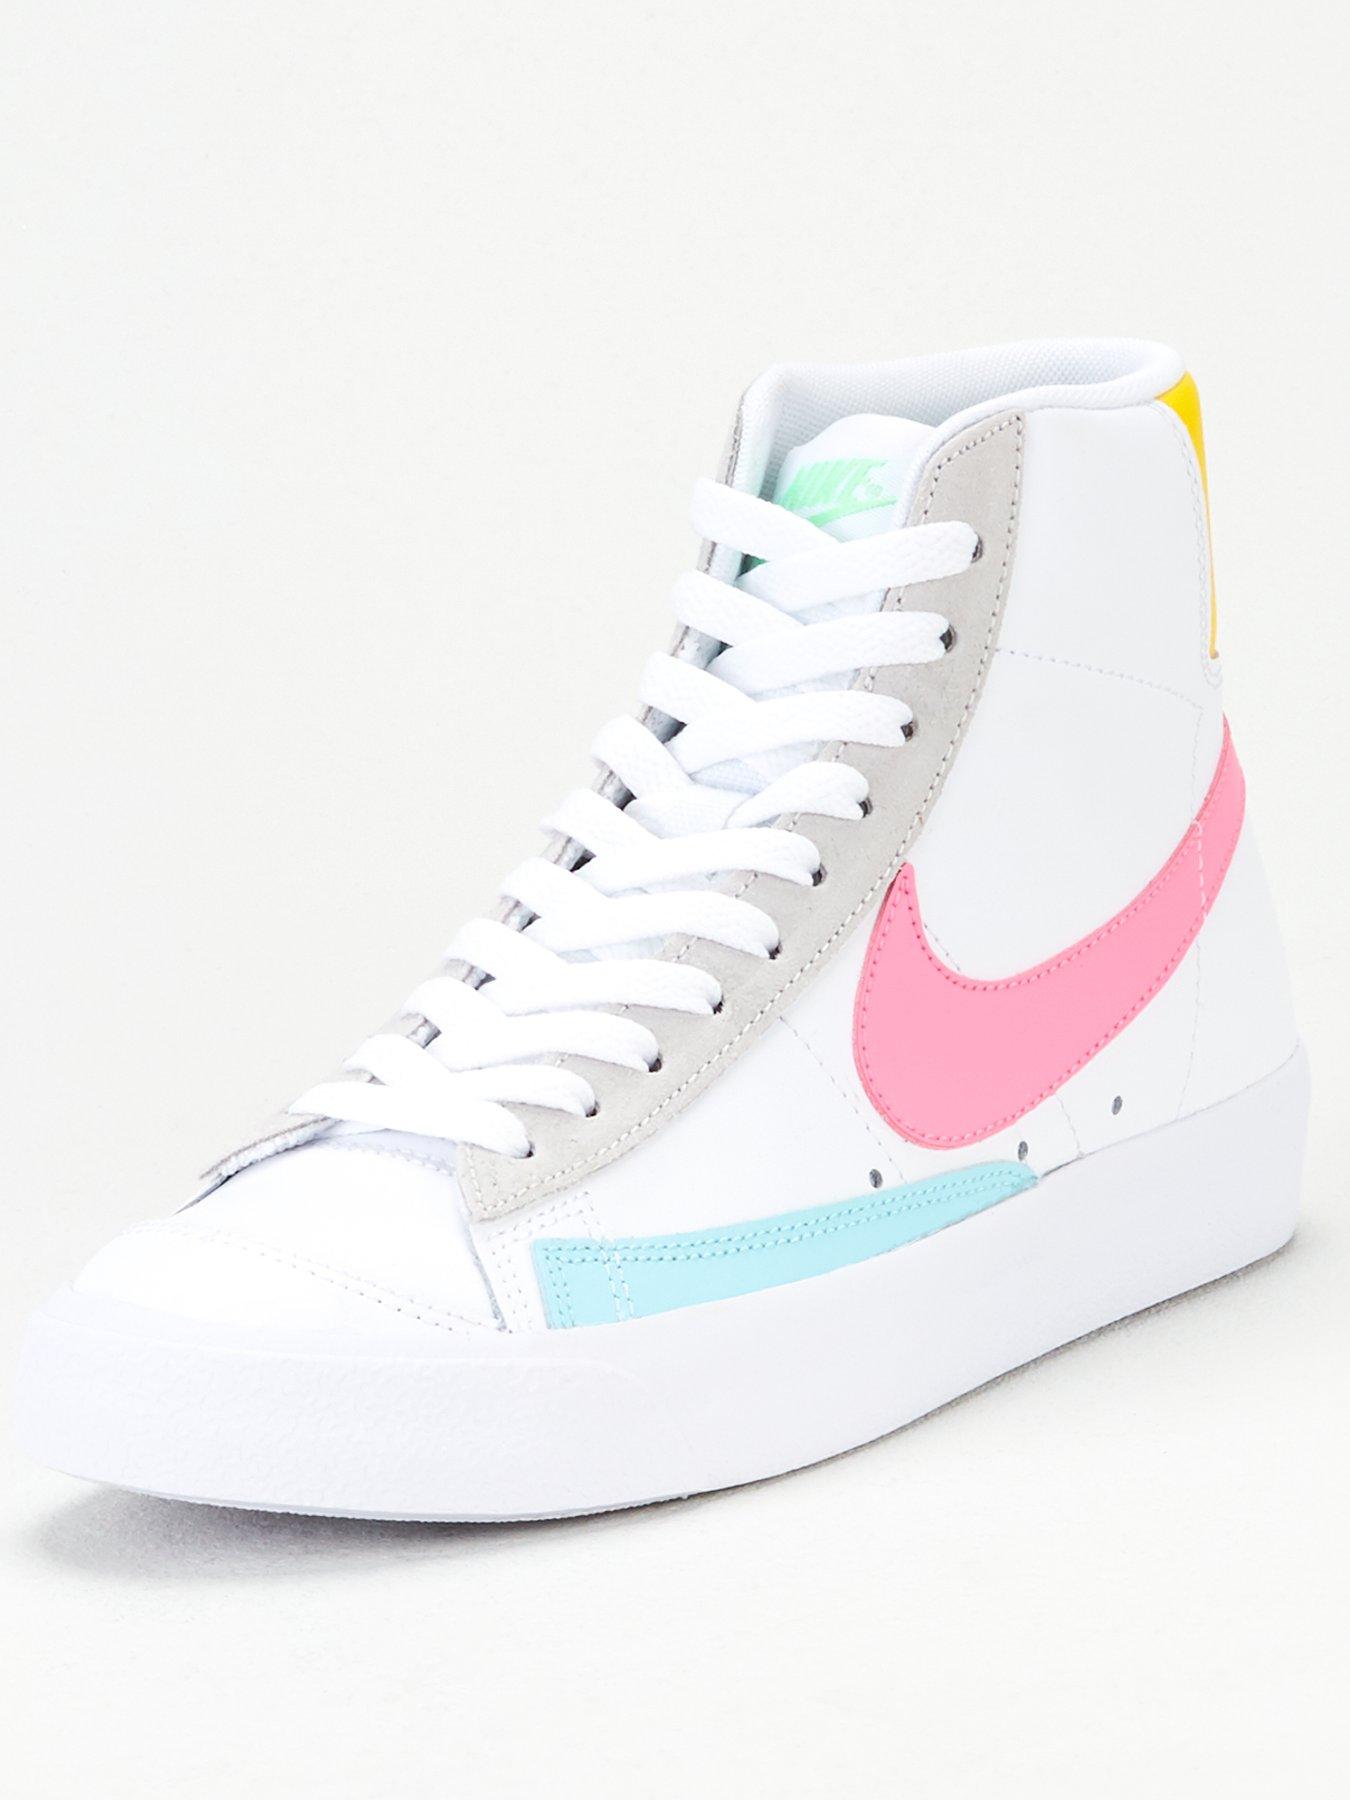 nike blazer mid 77 pink and blue